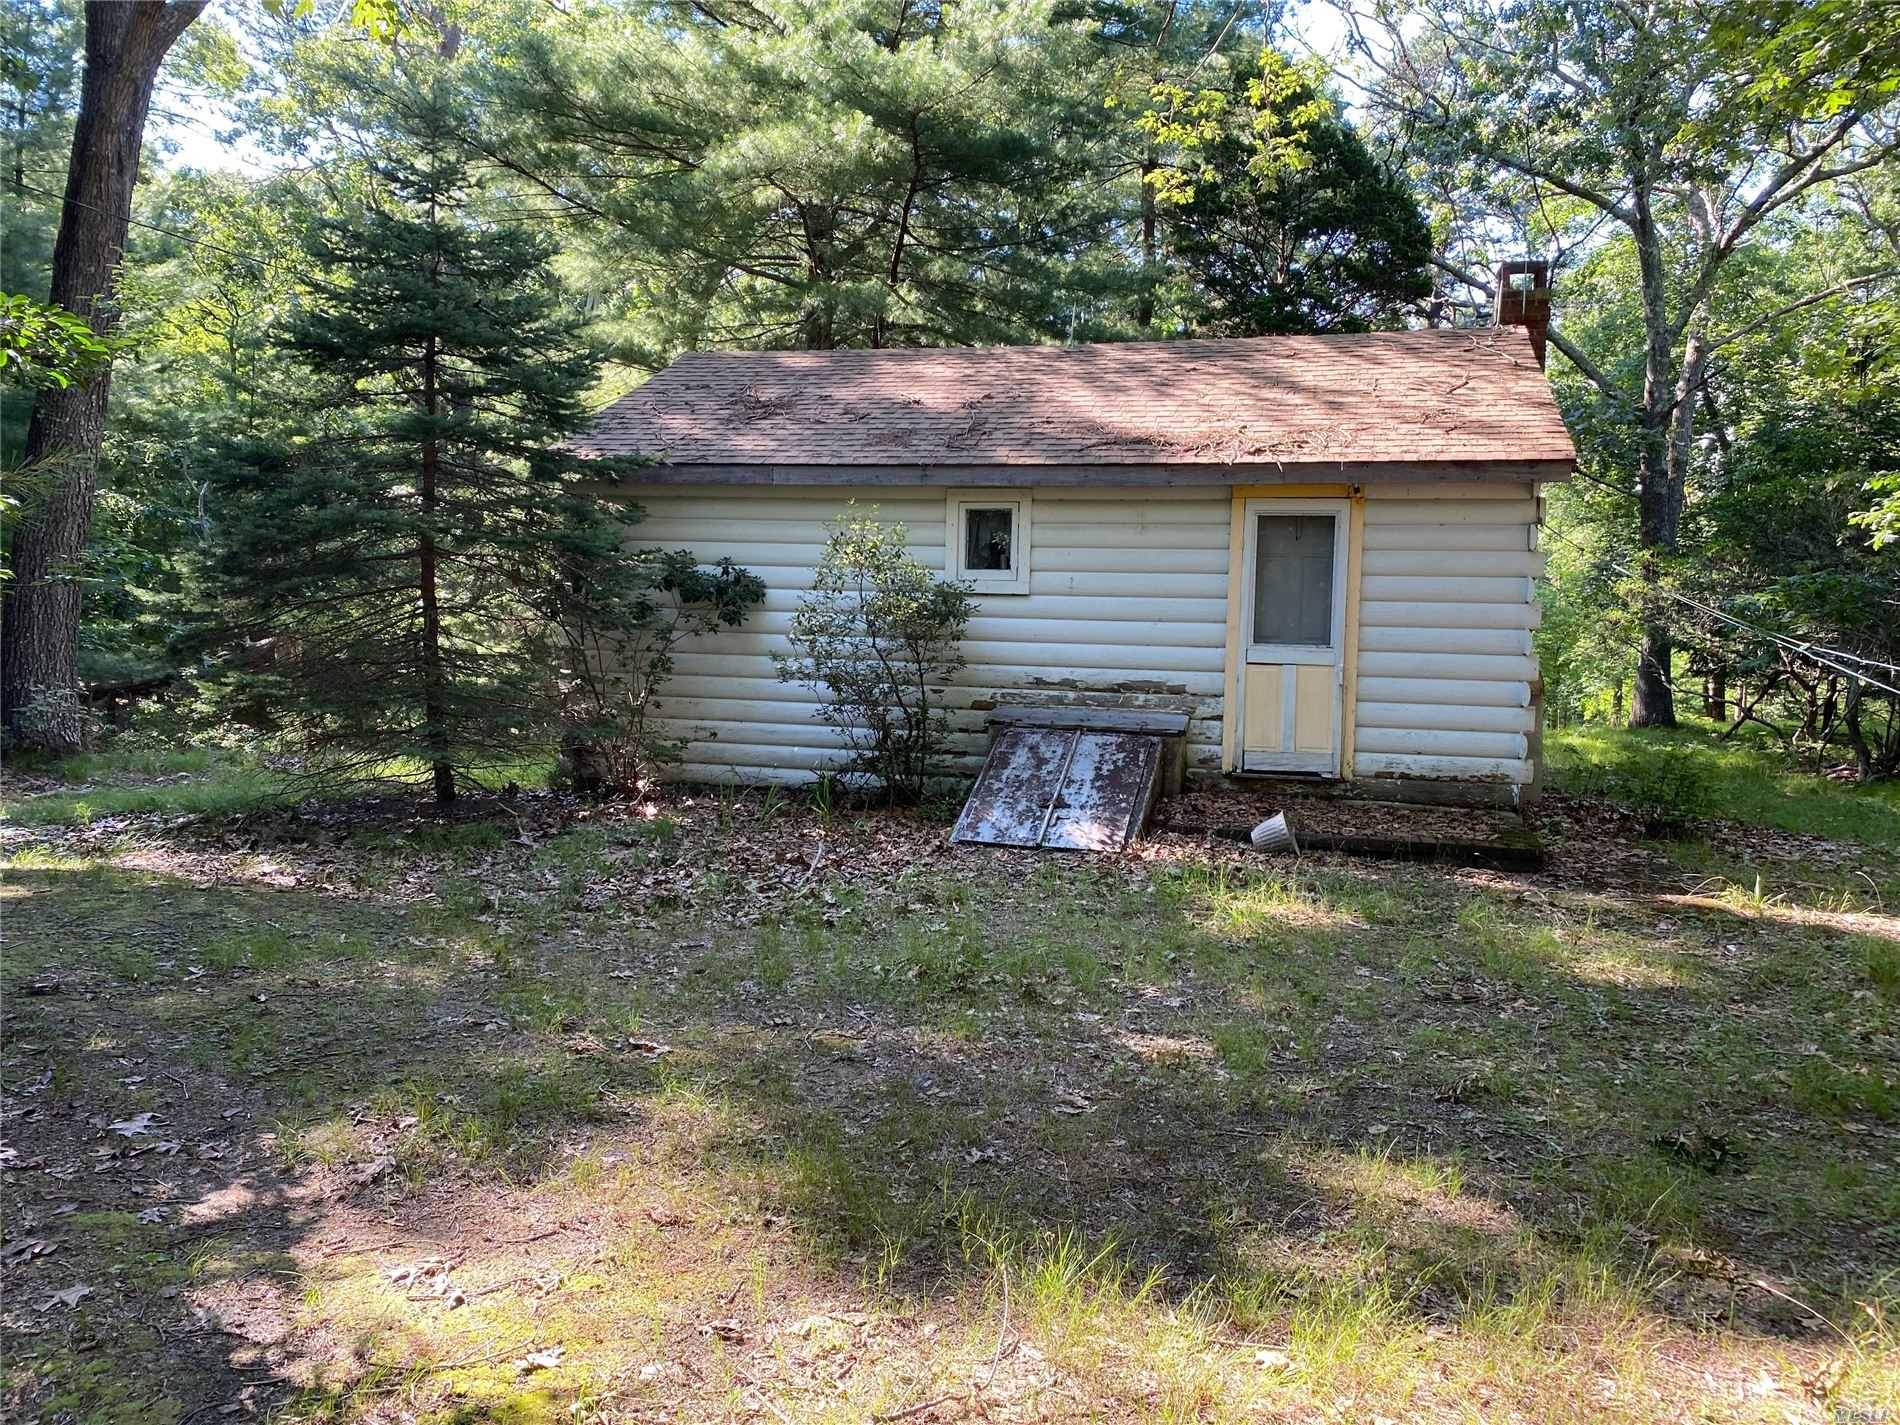 ATTENTION HOMEOWNERS OR BUILDERS LOOKING FOR SECLUSION SMALL CABIN ON PROPERTY, 3 LOTS TOTAL !